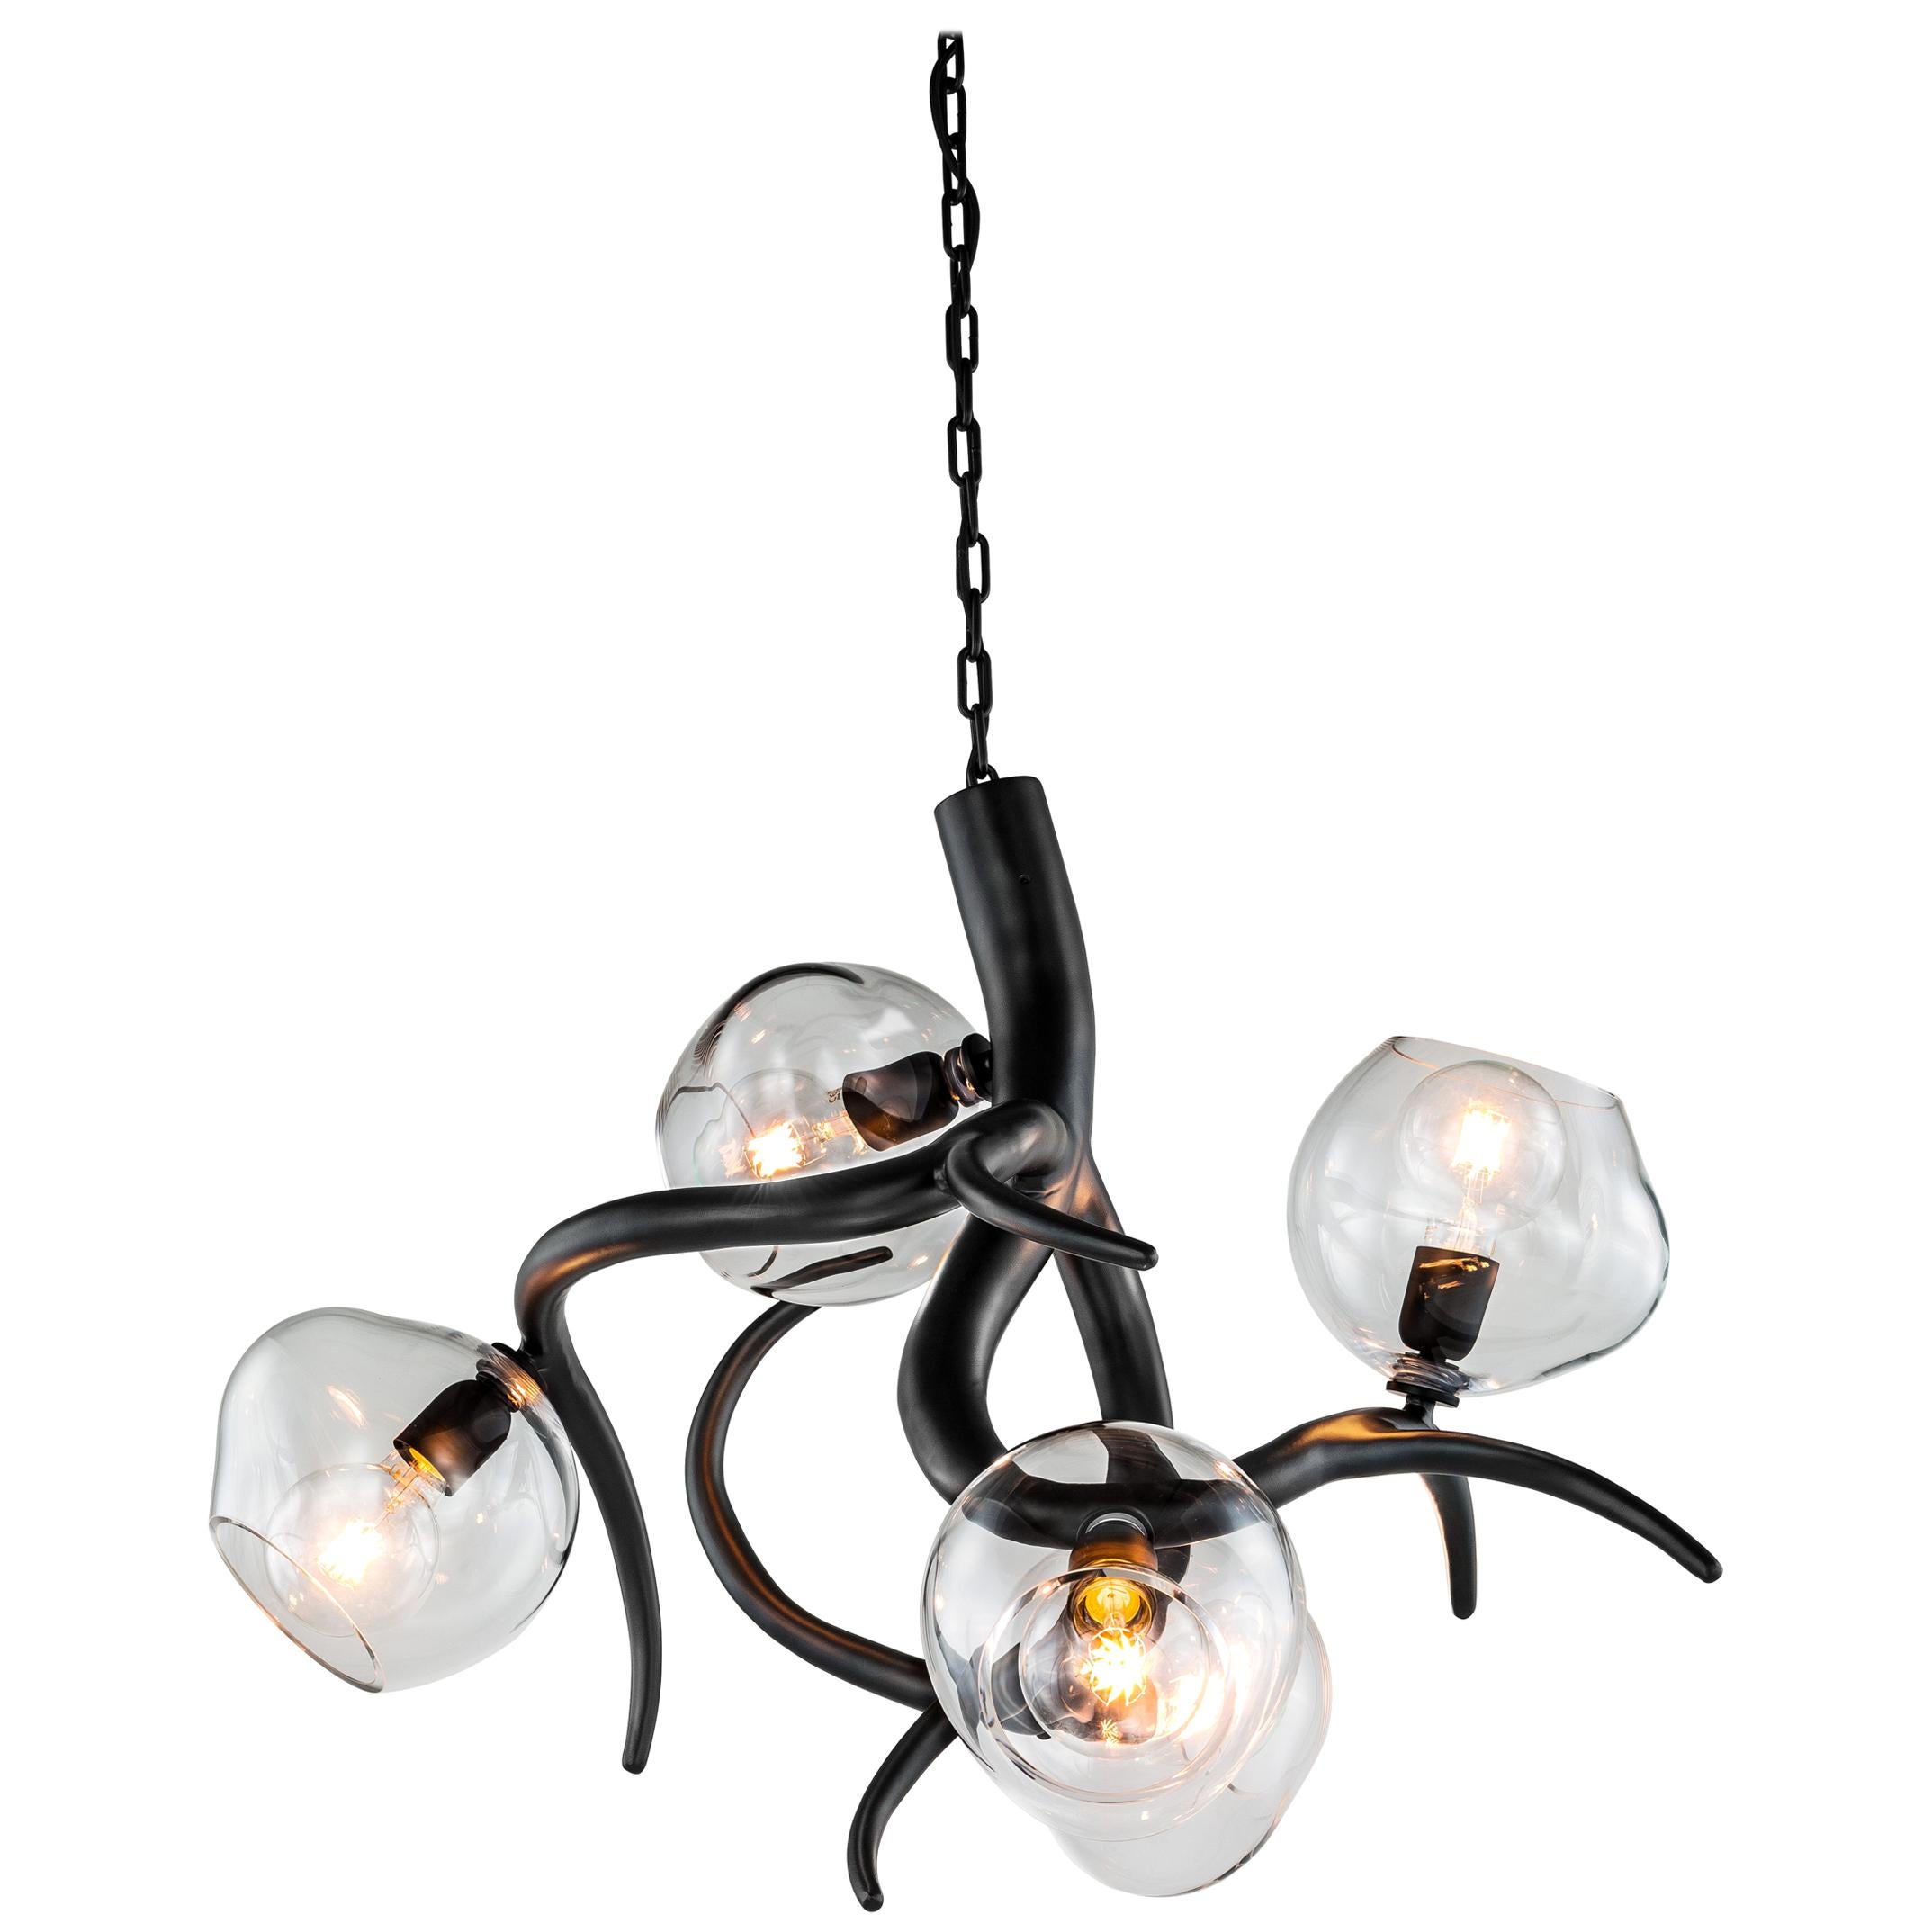 Modern Chandelier with Colored Glass in a Black Matt Finish, Ersa Collection